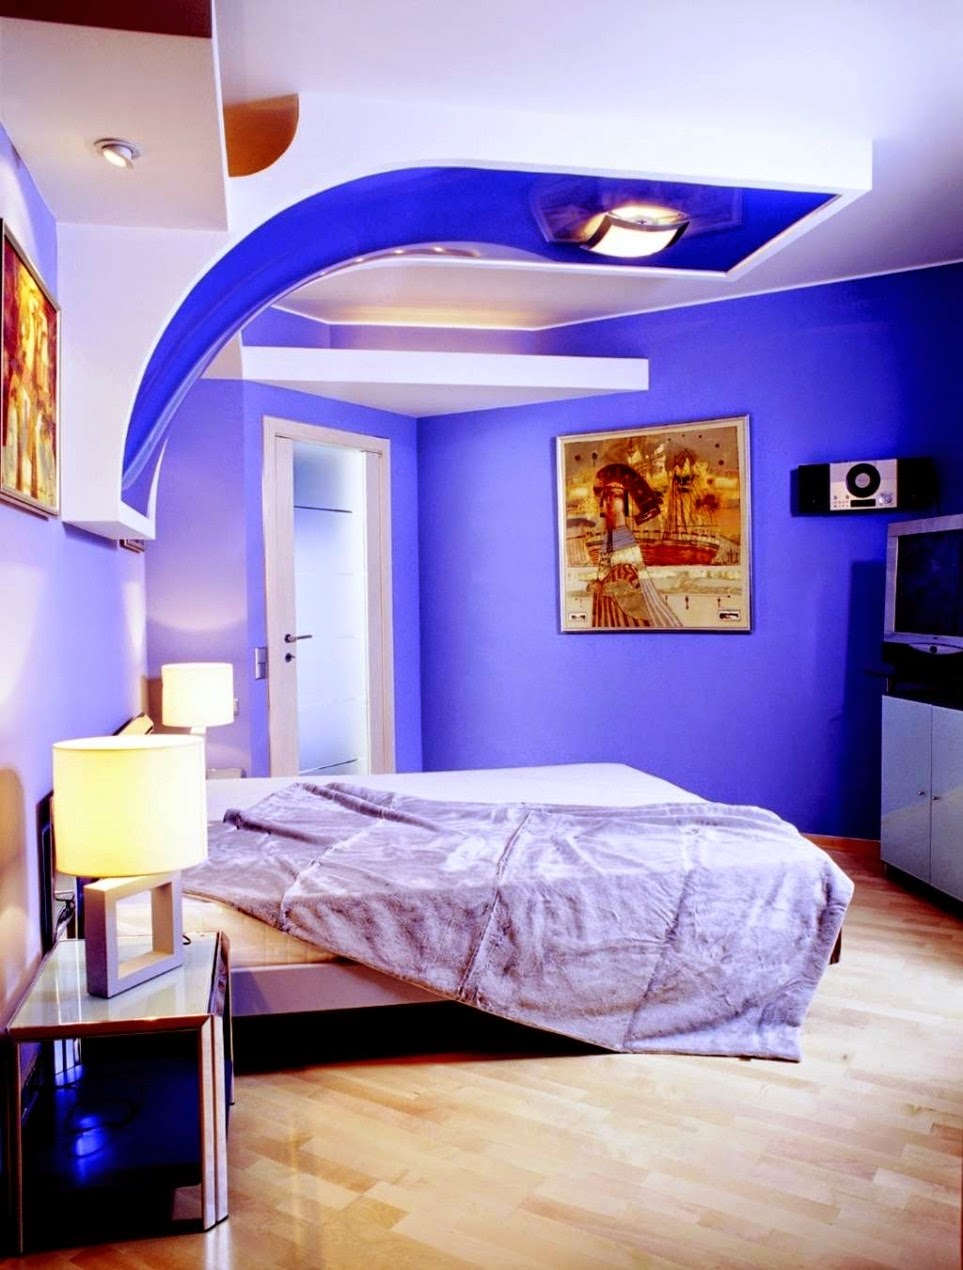 Interior Home Painting Tips Design Interior Home Painting Ideas For Minimalis Bedroom Blue Concept